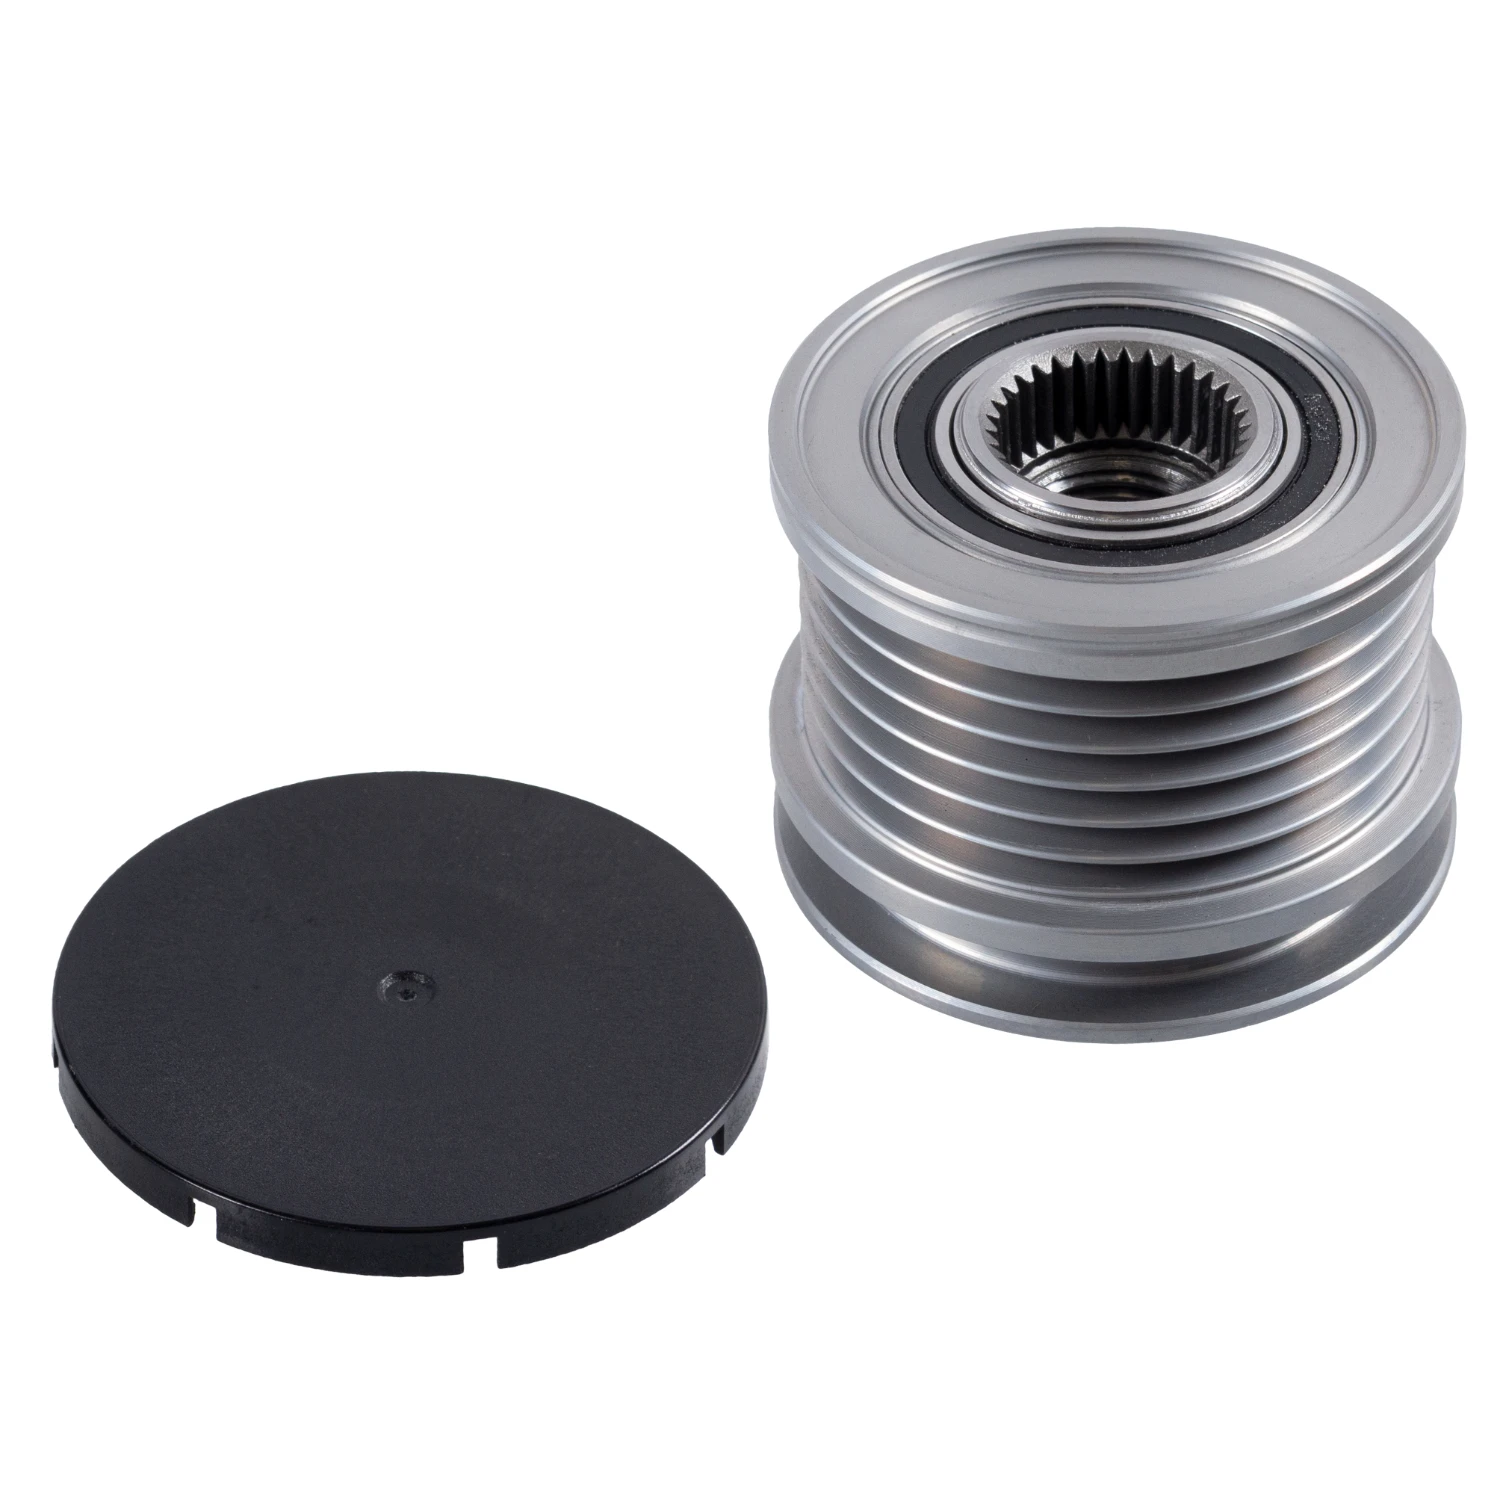 Store code: 34589 for; ALTERNATOR pulley (bearing) CADDY IV GOLF VII PASSAT 14 A3 12 A4 rep IBIZA seat IBIZA seat LEON 13